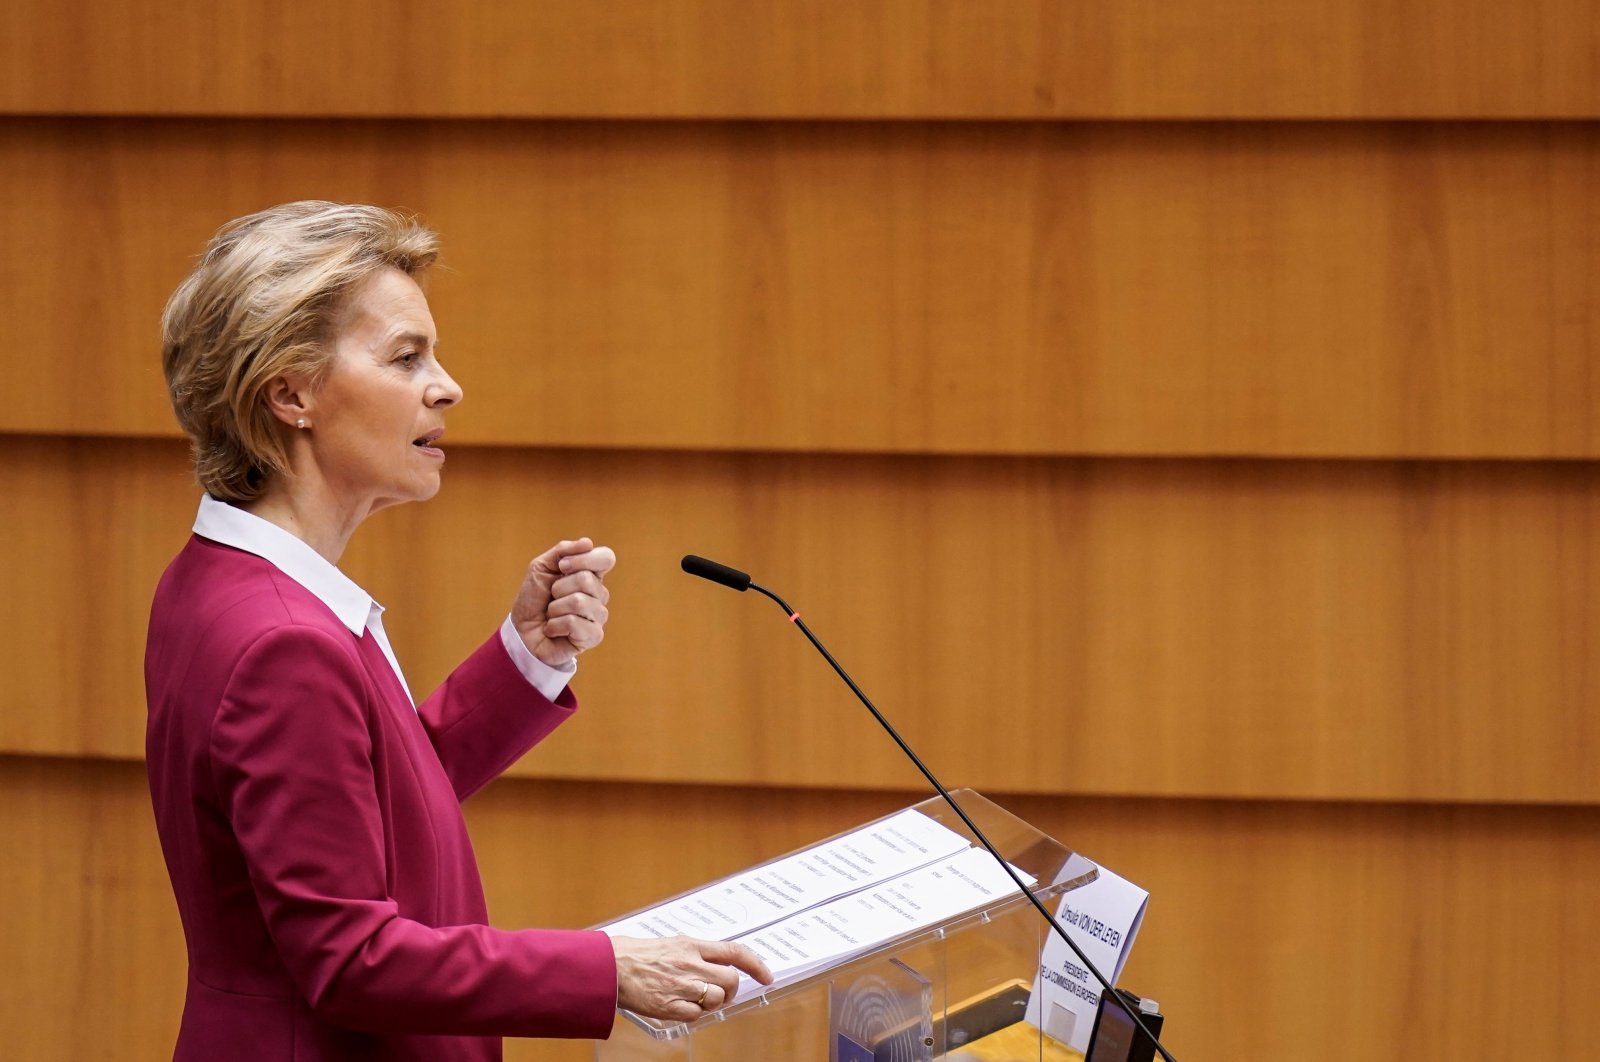 European Commission President Ursula von der Leyen speaks during a plenary session of the European Parliament, Brussels, May 27, 2020. (AFP Photo)